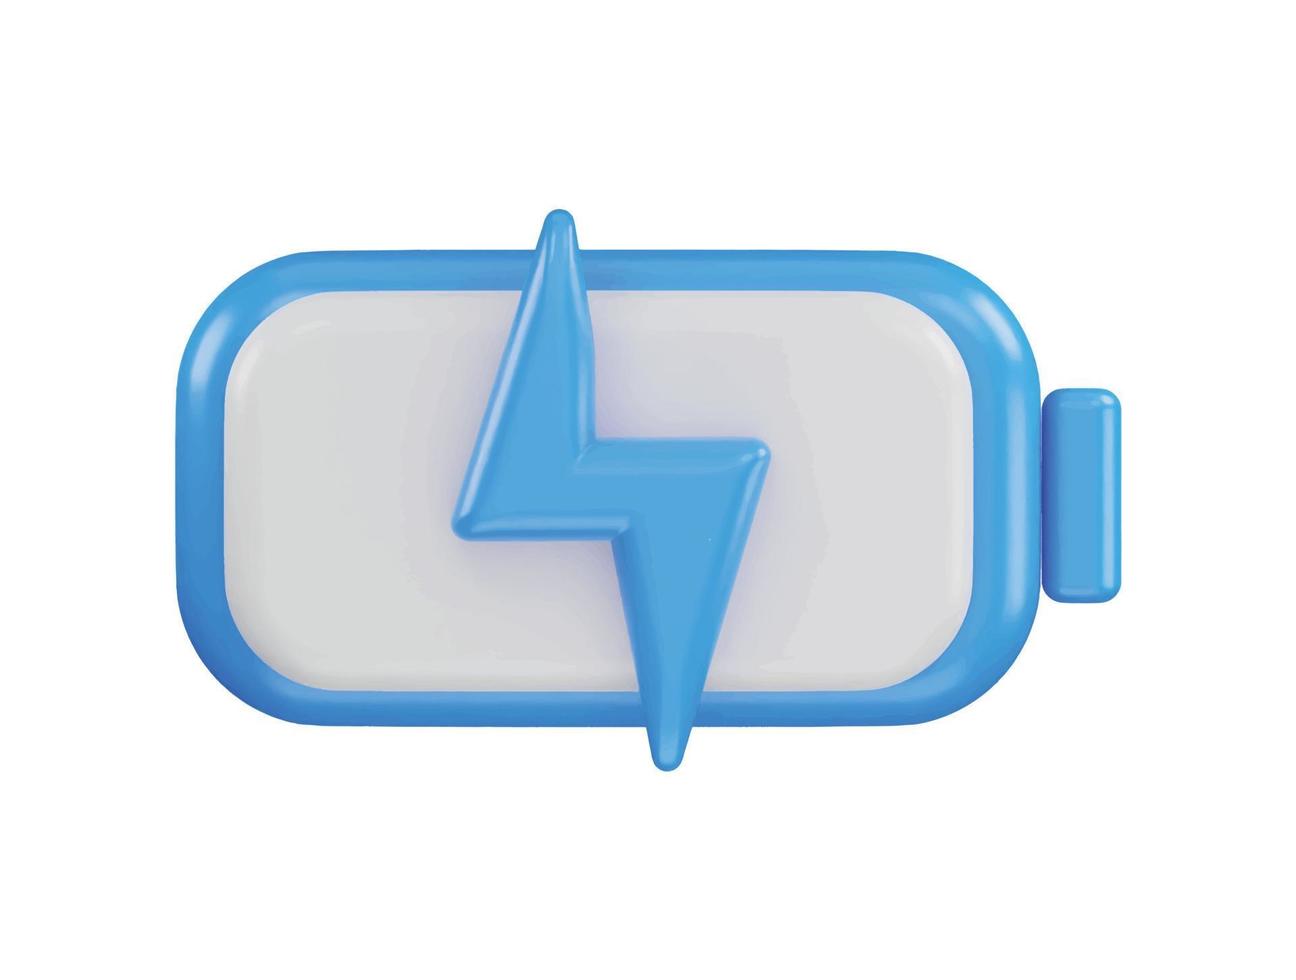 battery charging icon 3d rendering vector illustration